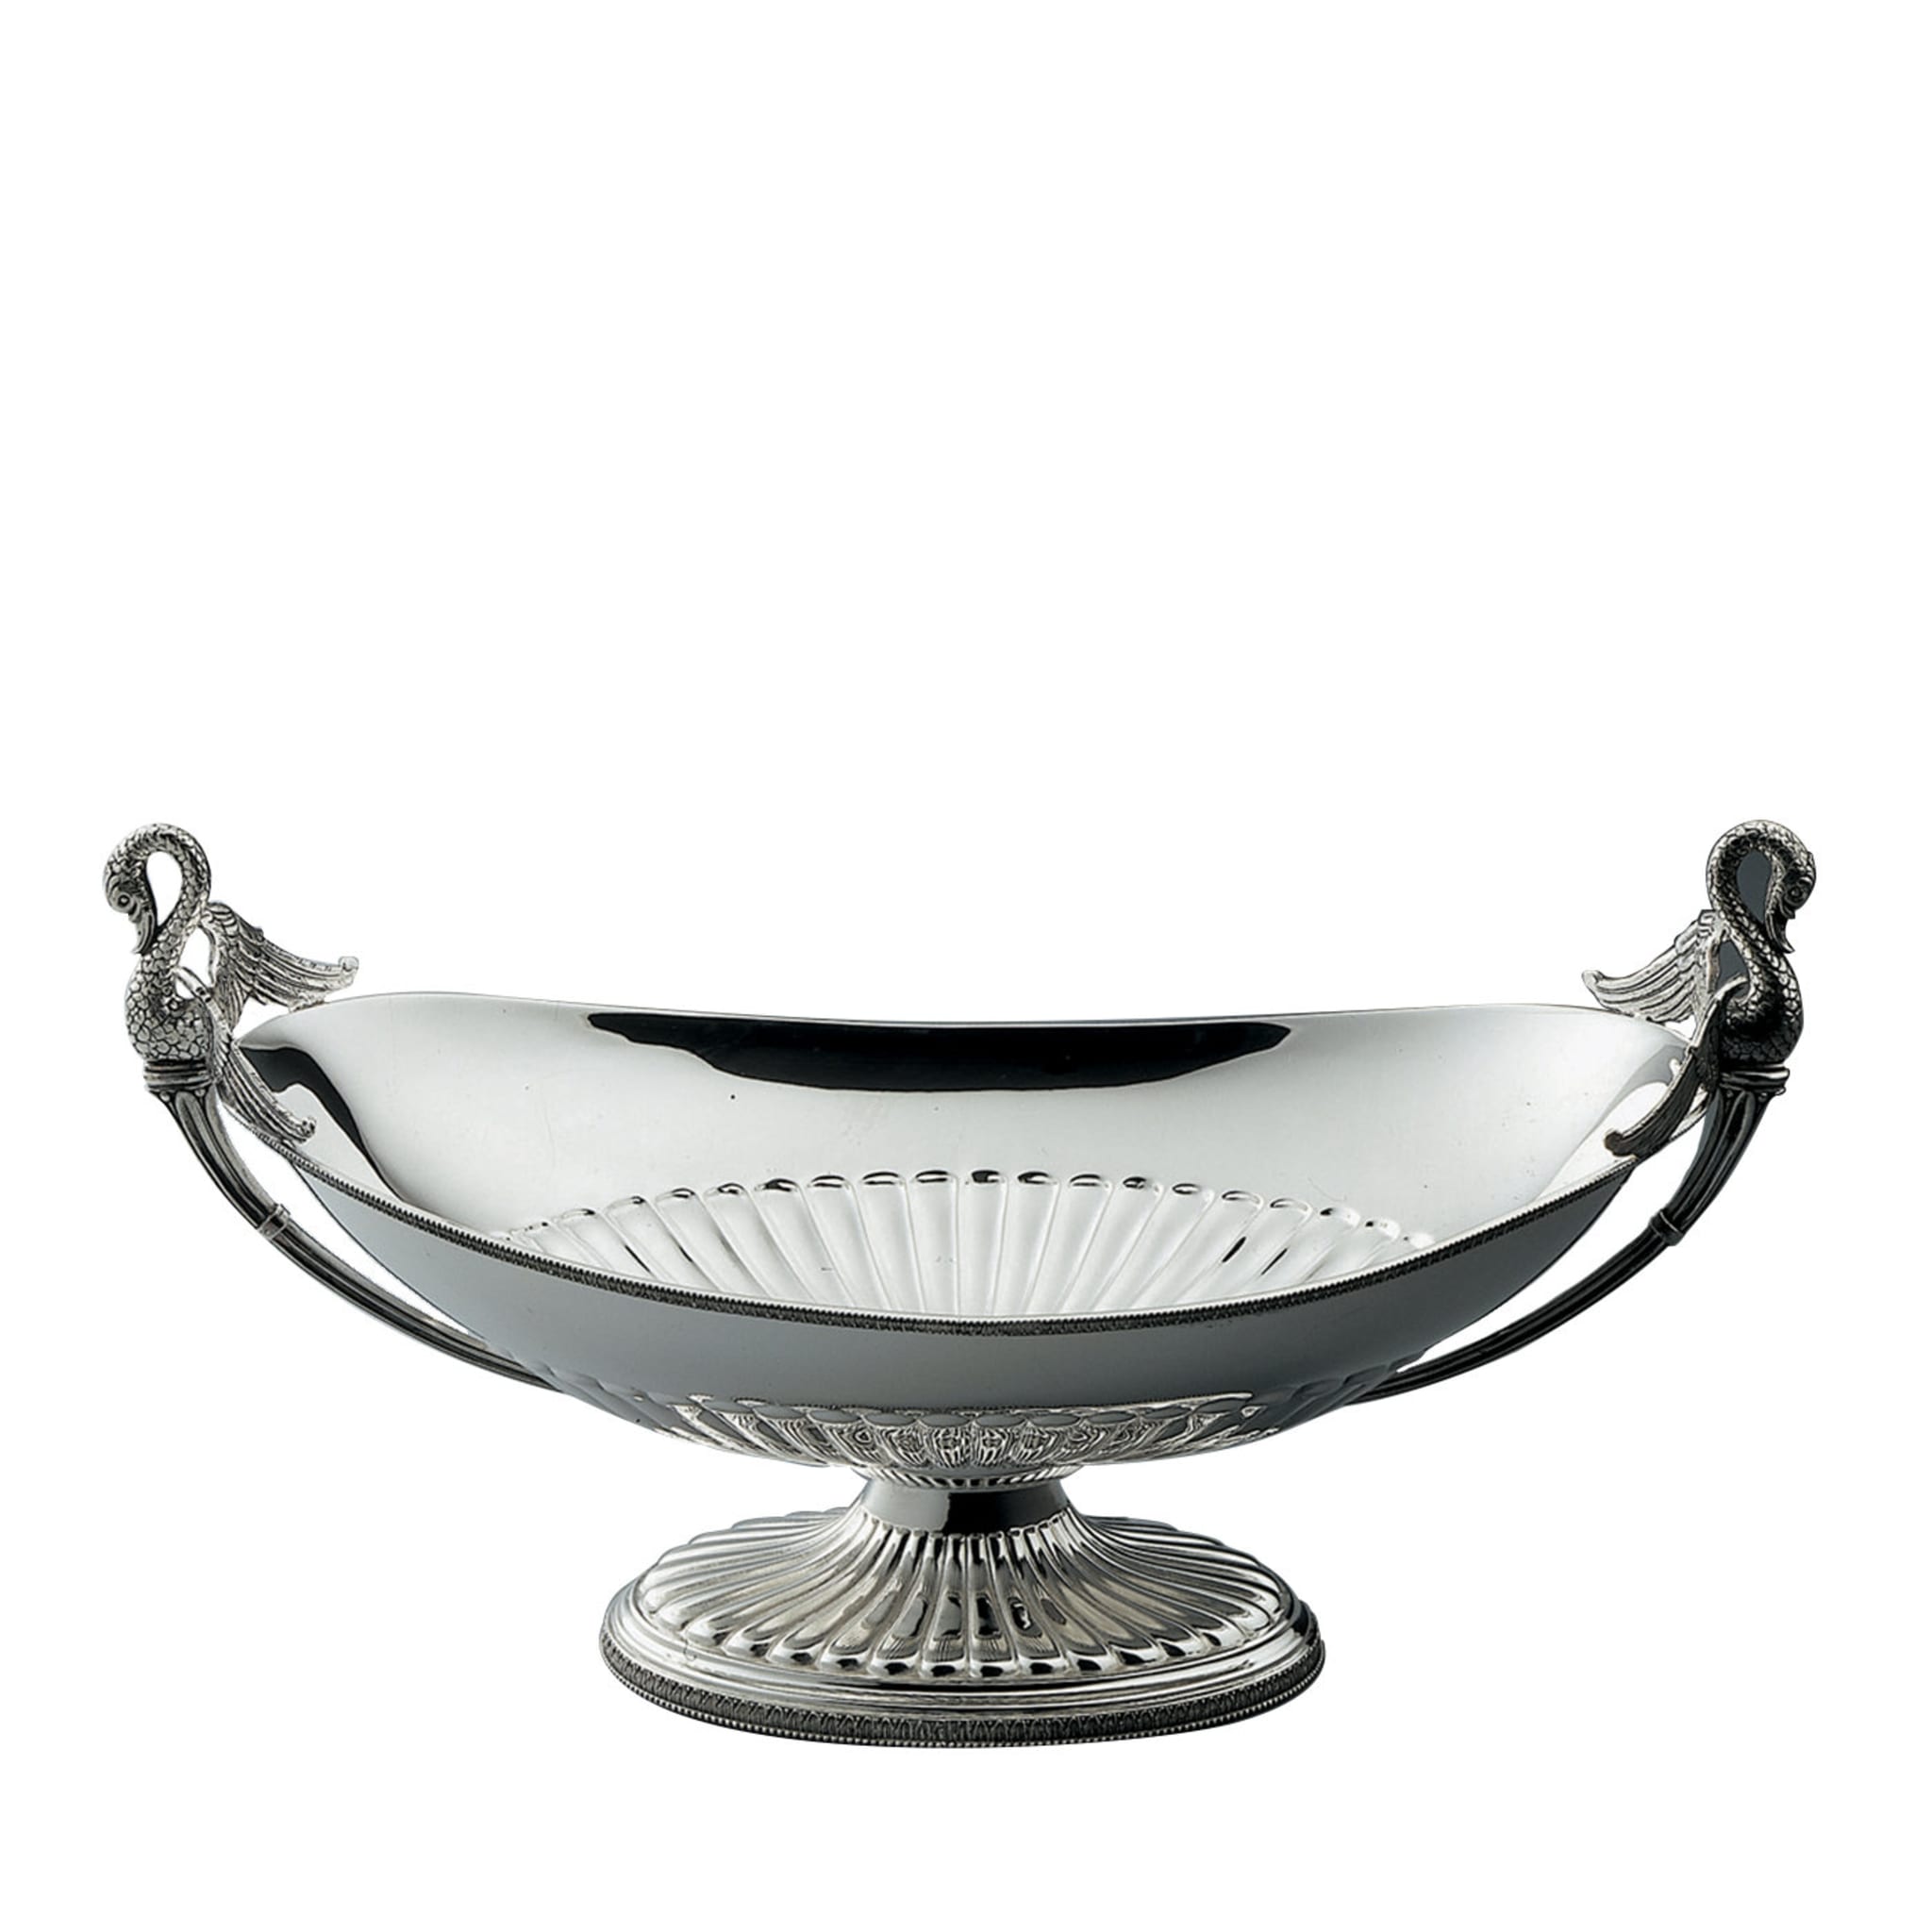 Impero Centerpiece with Handles - Main view